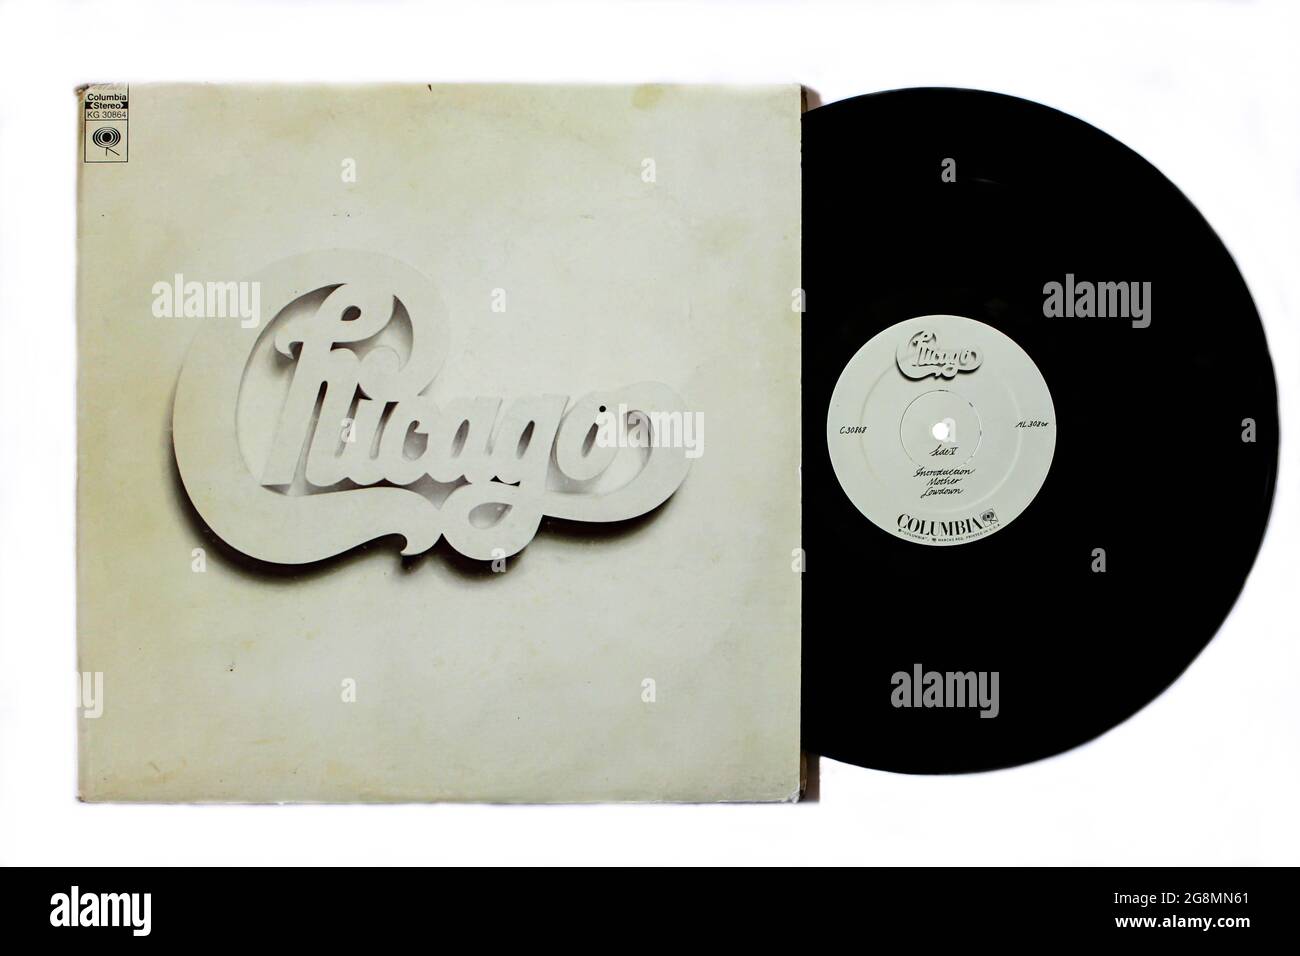 Rock band, Chicago music album on vinyl record LP disc. Titled: Chicago at Carnegie Hall live album cover Stock Photo